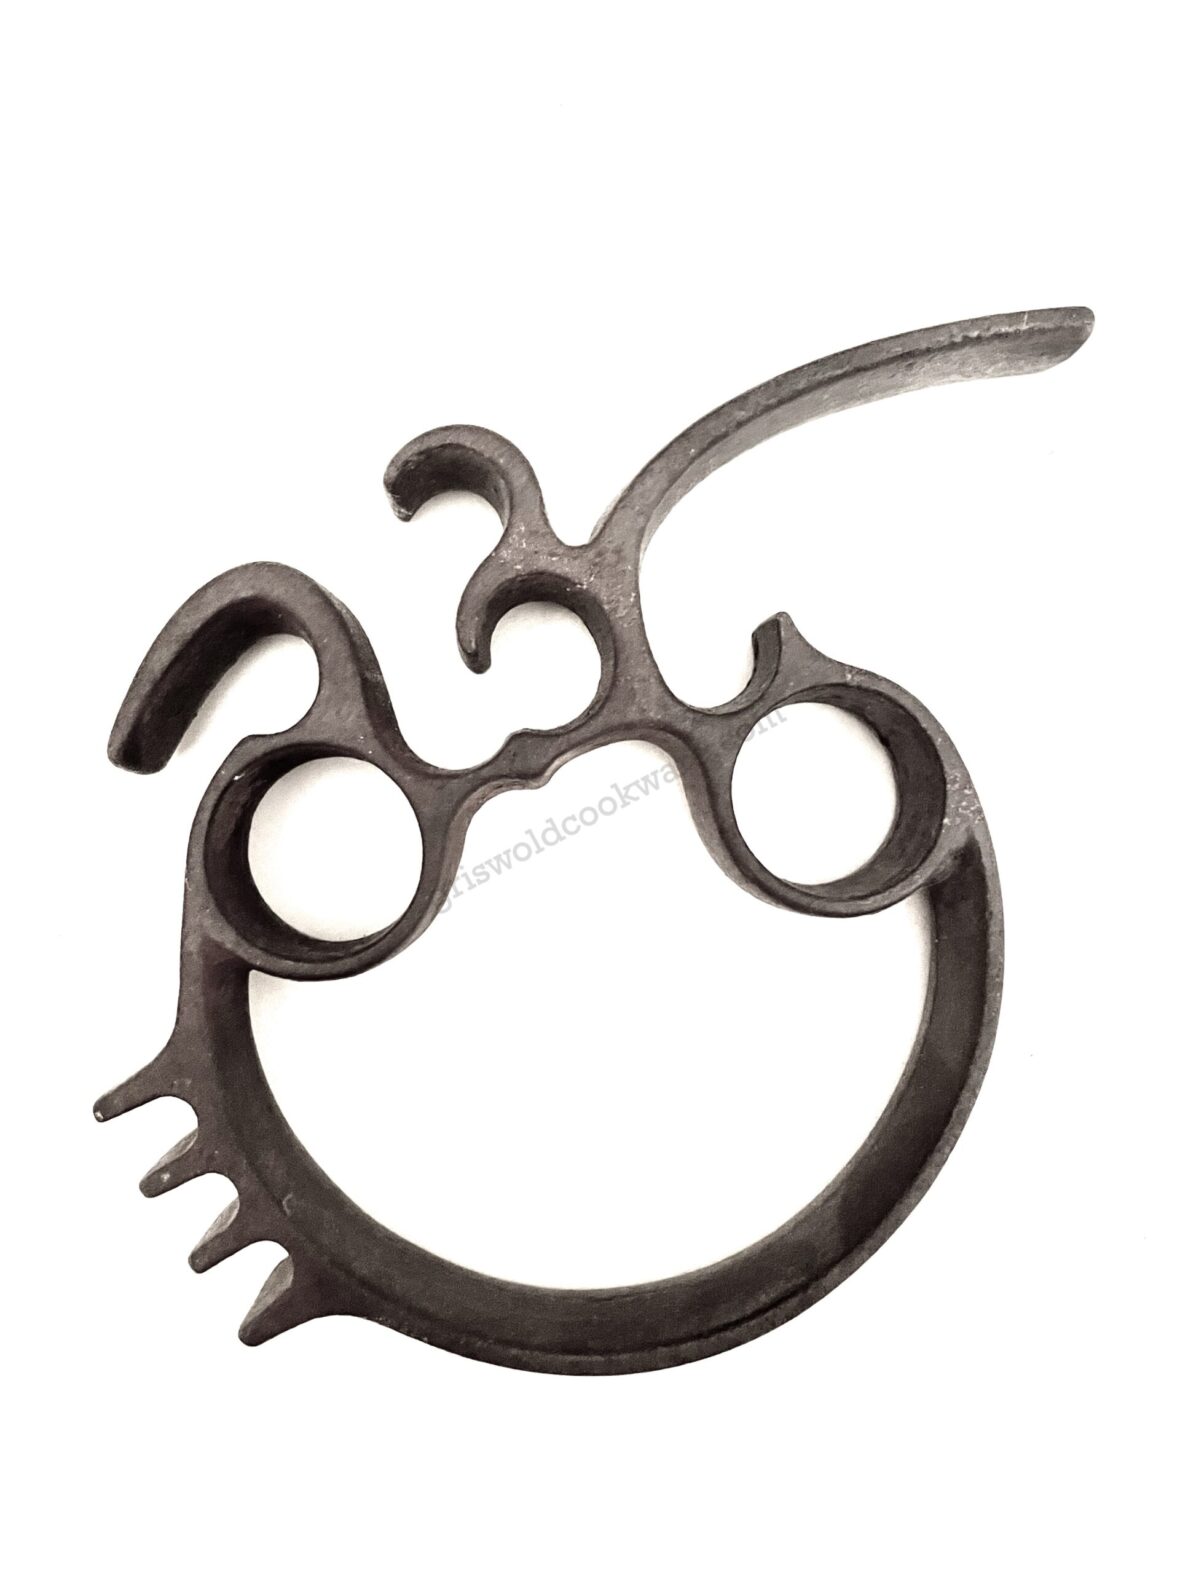 7 way universal tool cast iron brass thayer unusual shape what is this two holes points hook round finger